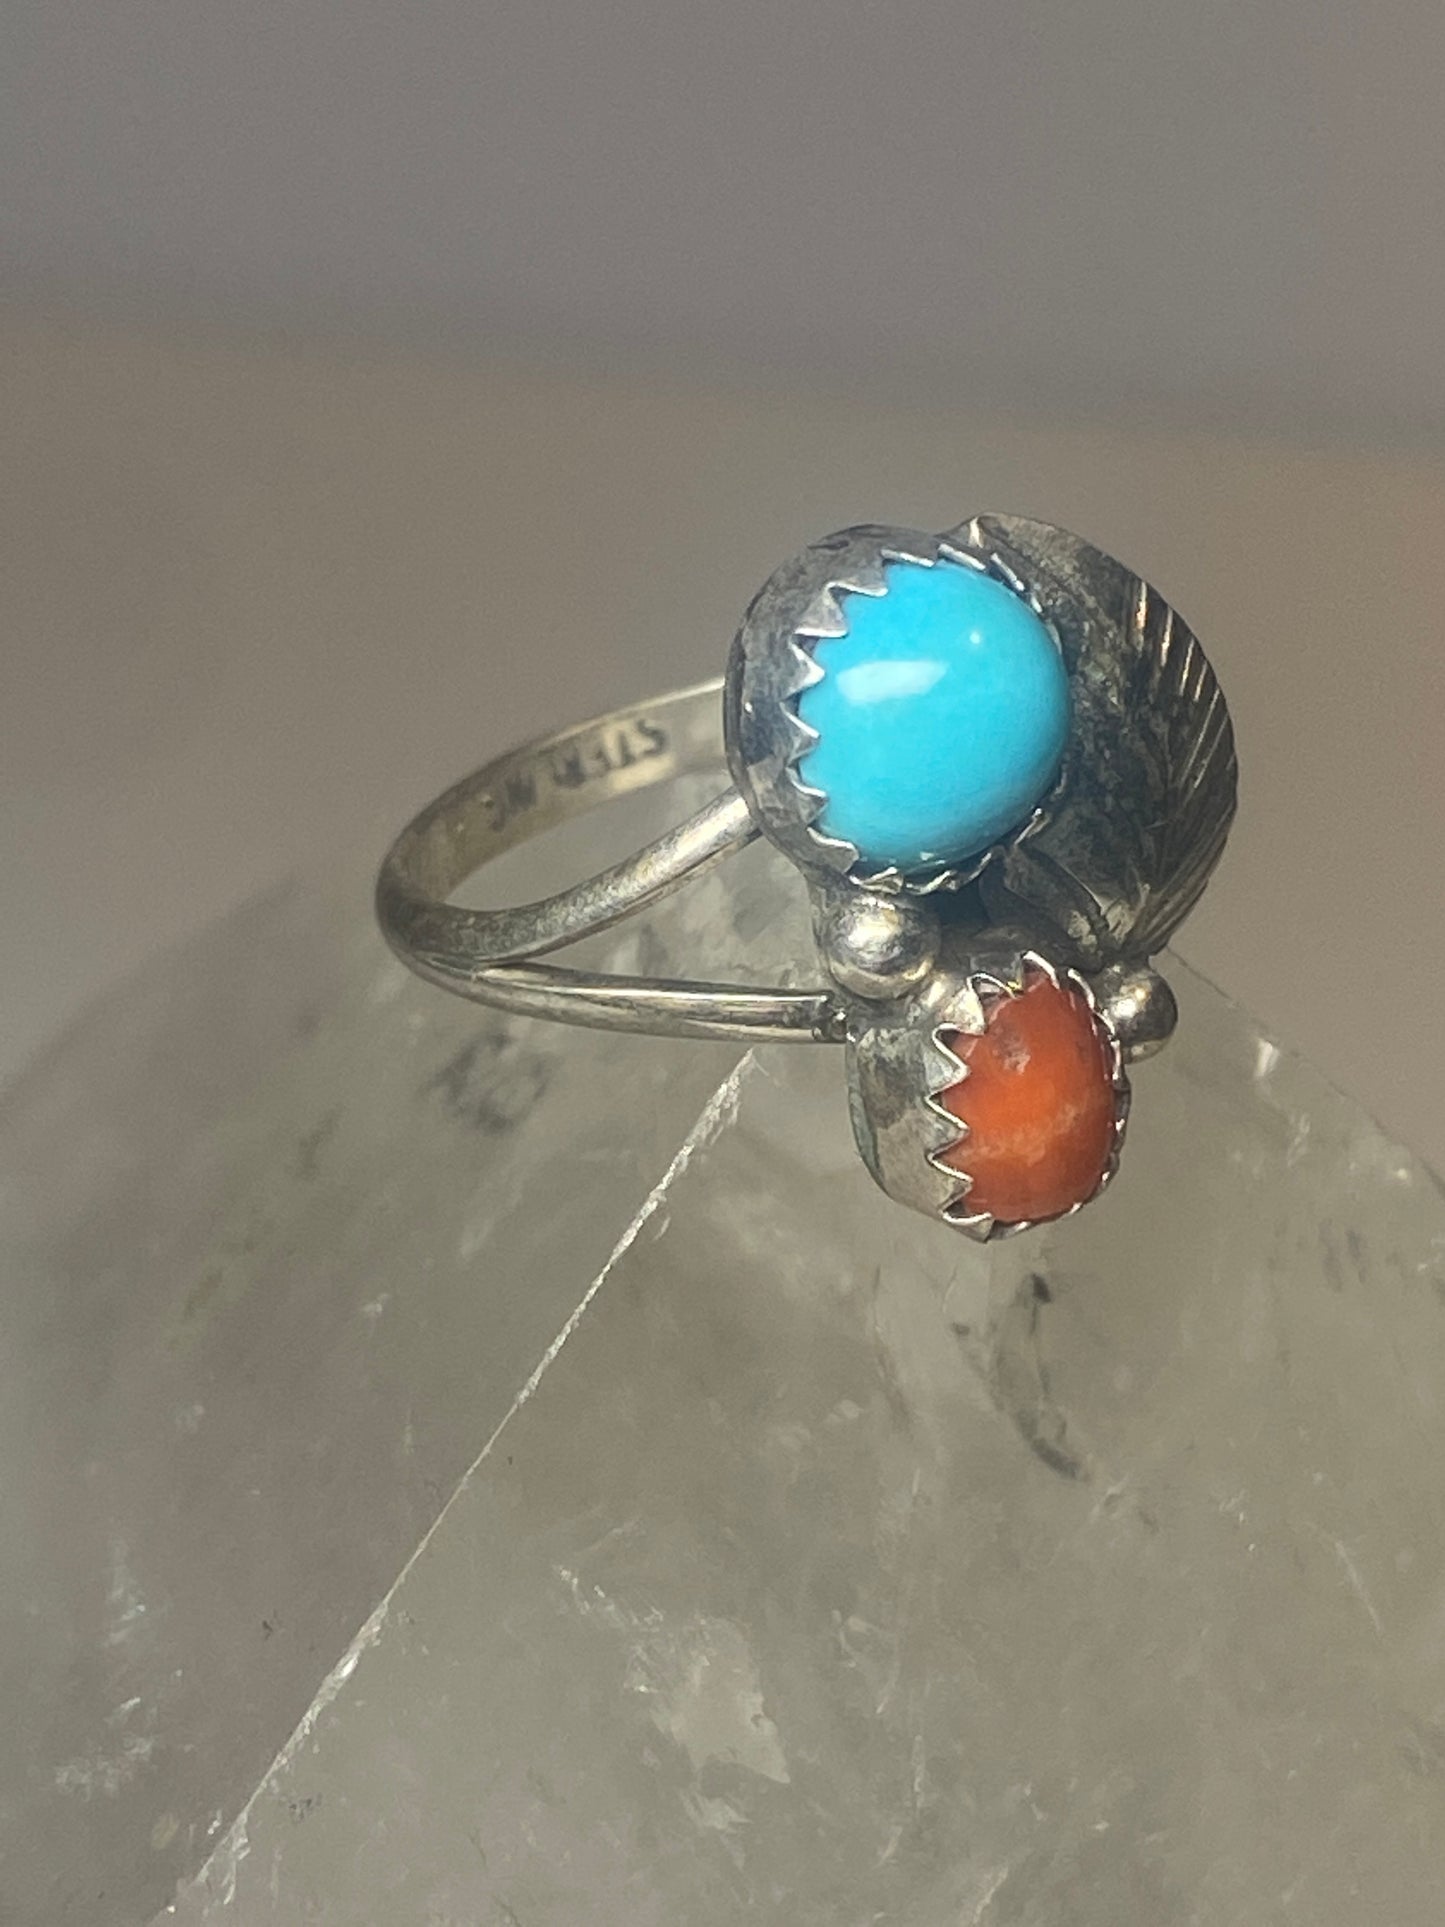 Turquoise ring coral southwest pinky floral leaves blossom baby children women girls  u